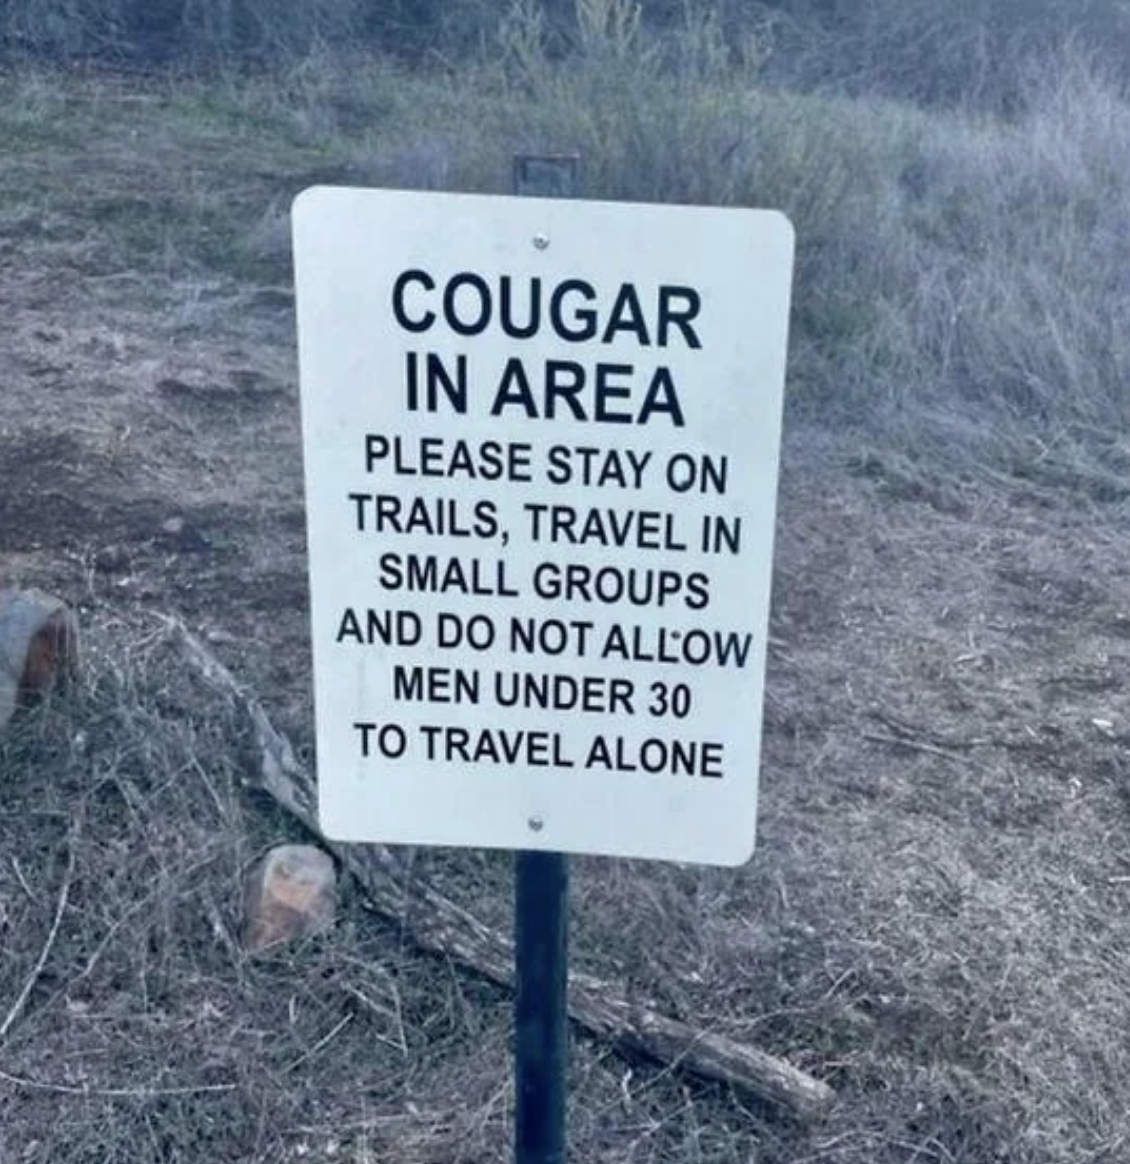 Sign warning of a cougar in the area, advising to stay on trails and not let men under 30 travel alone